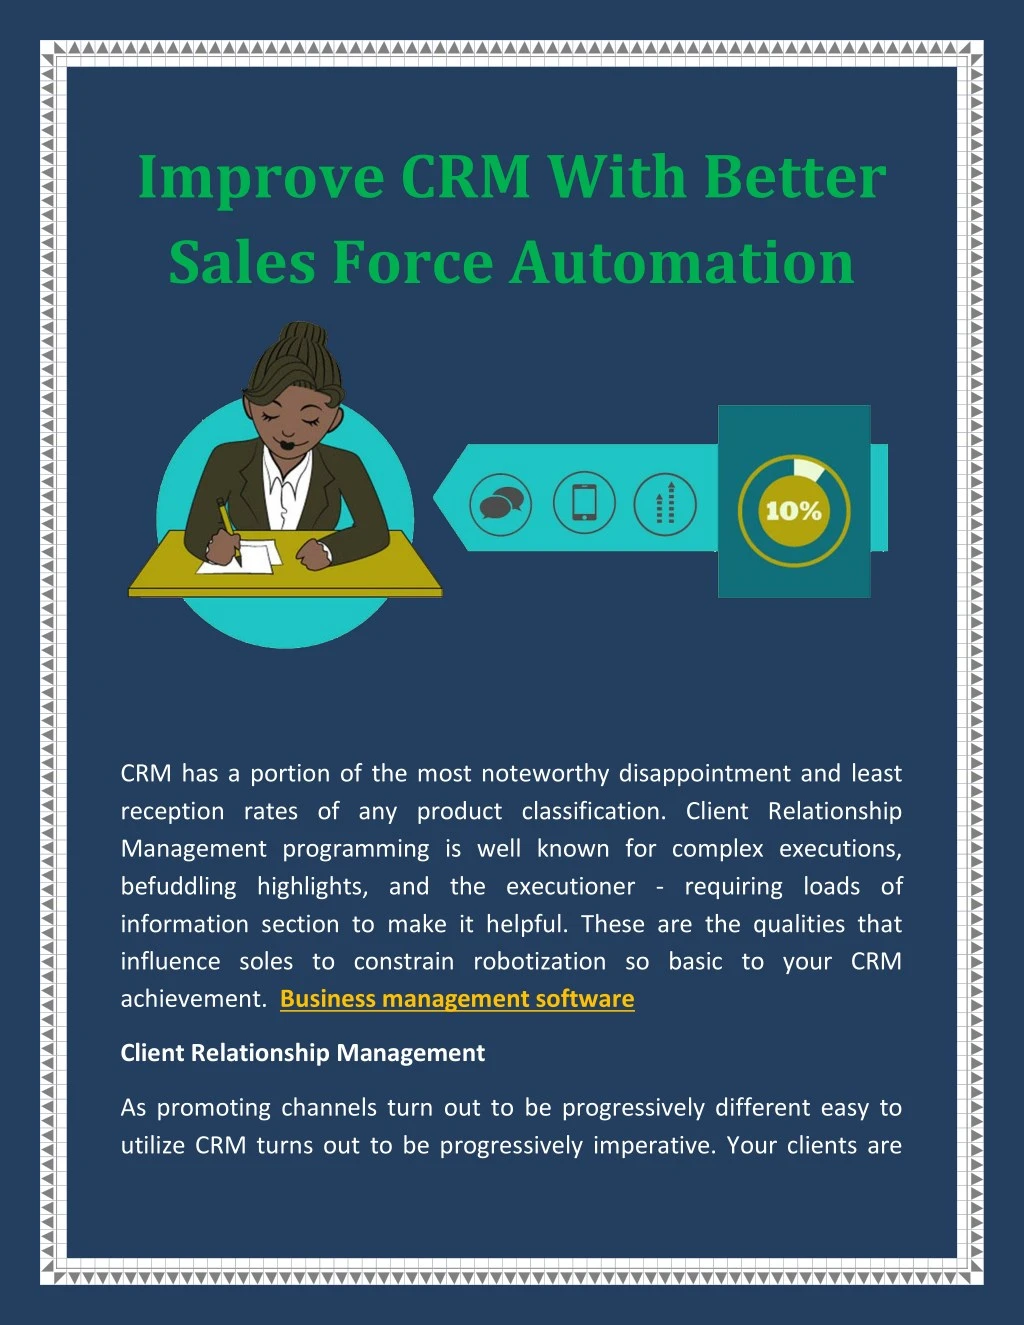 improve crm with better sales force automation